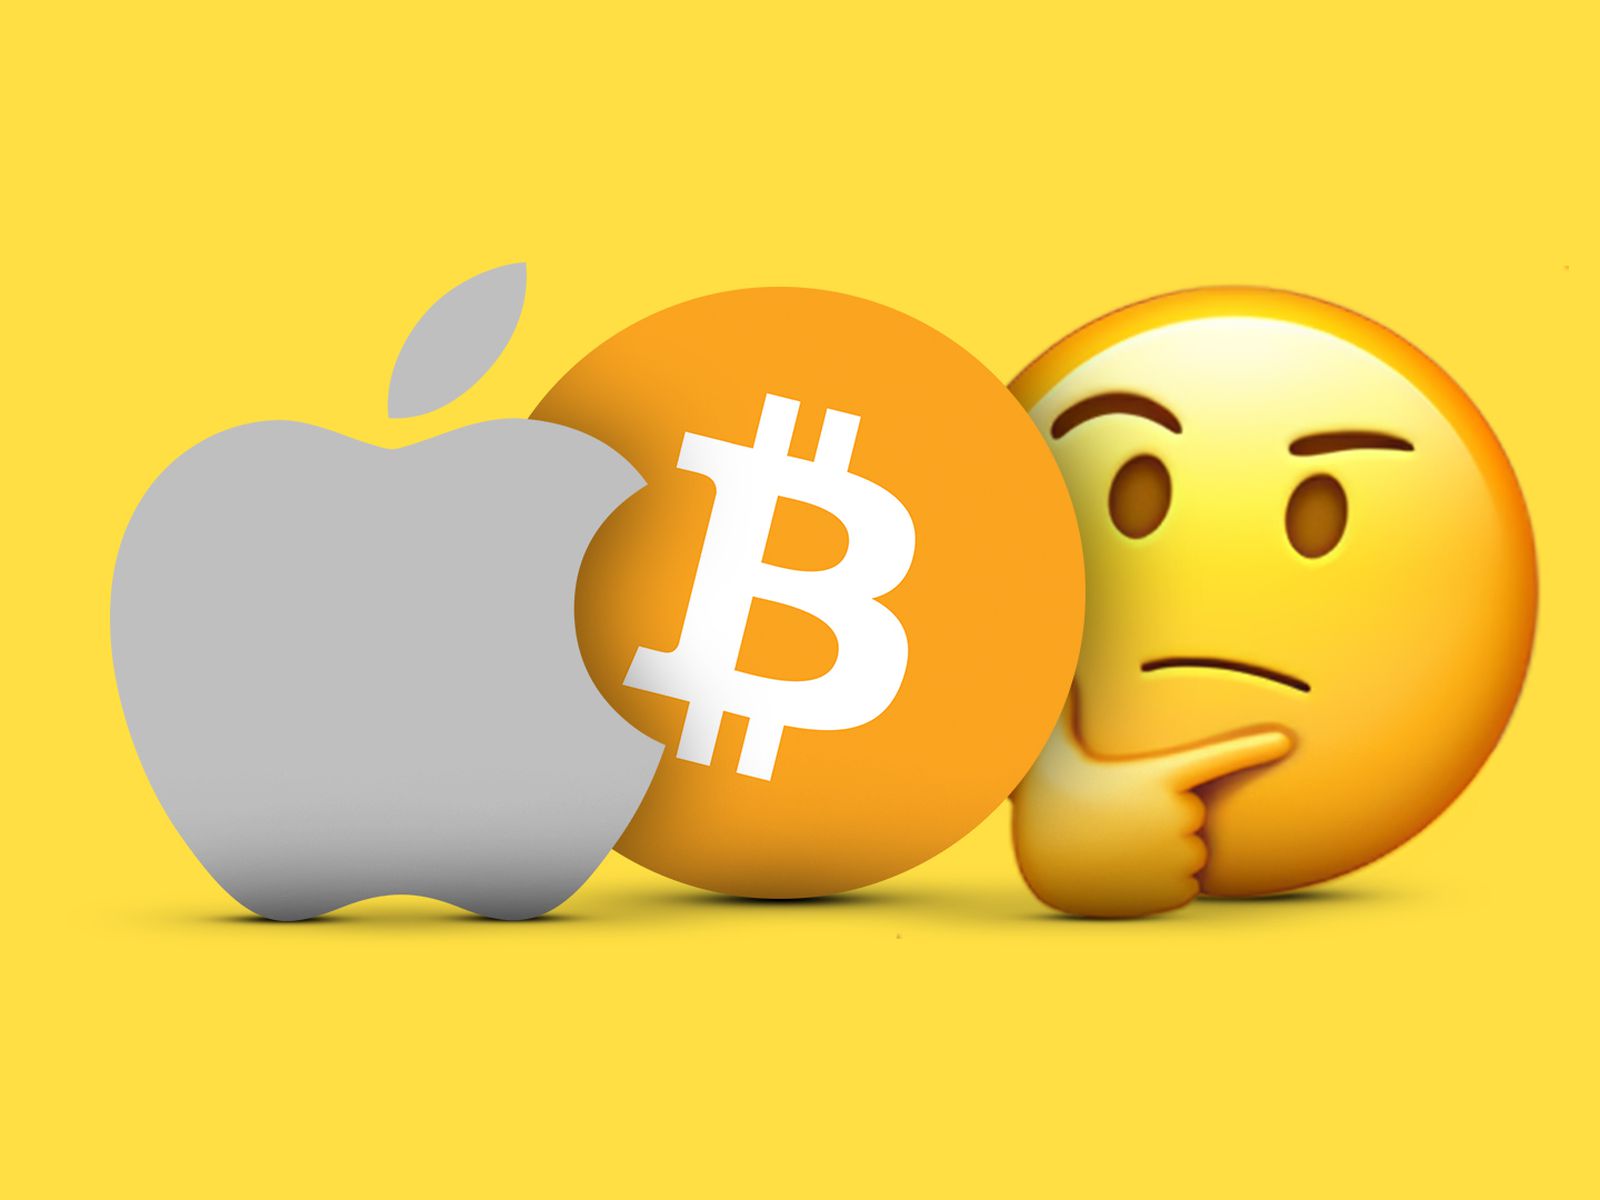 Aapl buying bitcoin low fee crypto by using credit card